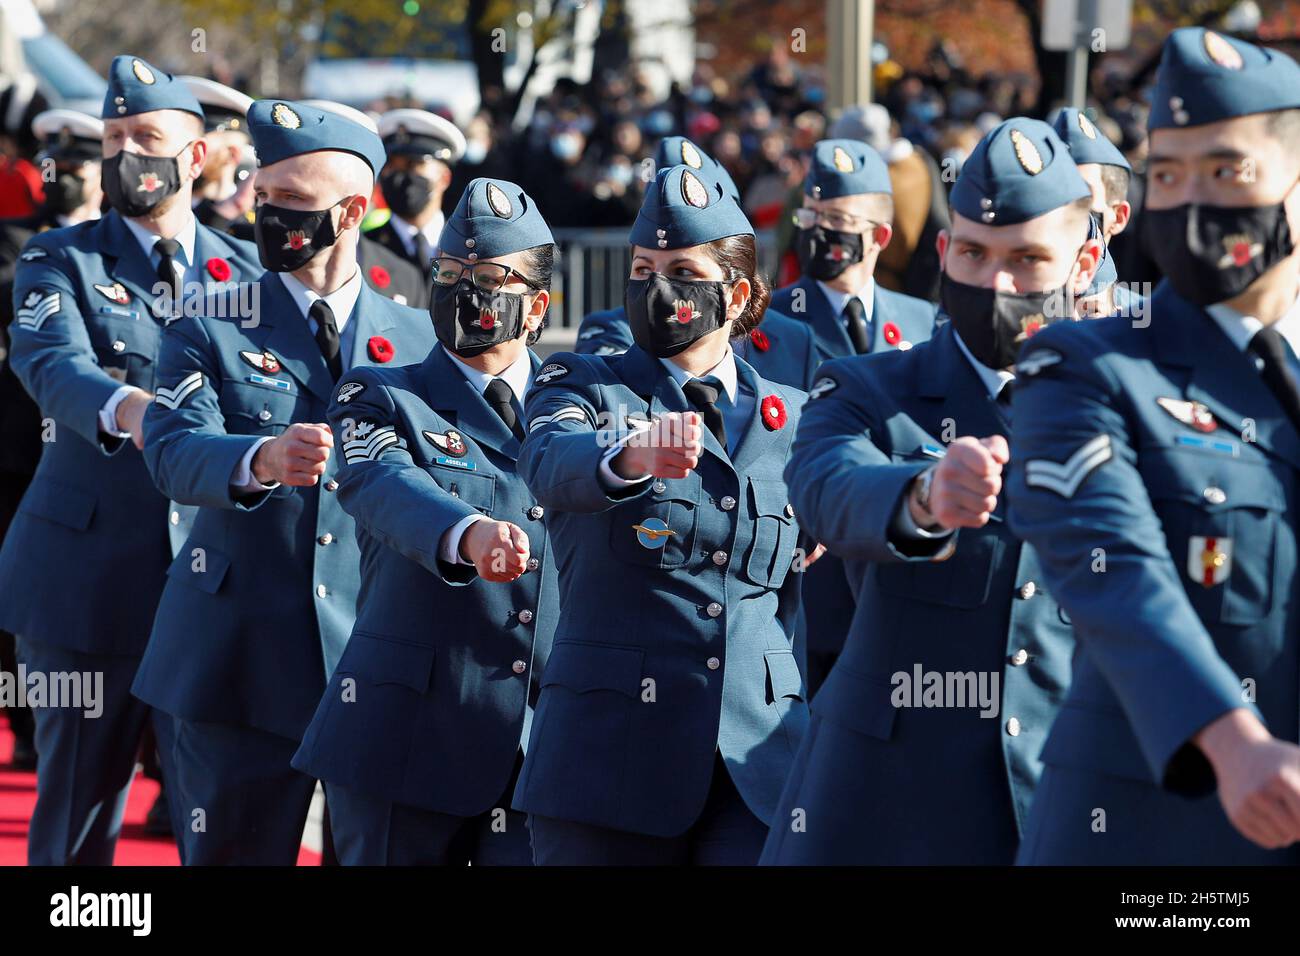 Royal Canadian Air Force's members march prior to a ceremony at the  National War Memorial on Remembrance Day in Ottawa, Ontario, Canada  November 11, 2021. REUTERS/Patrick Doyle Stock Photo - Alamy